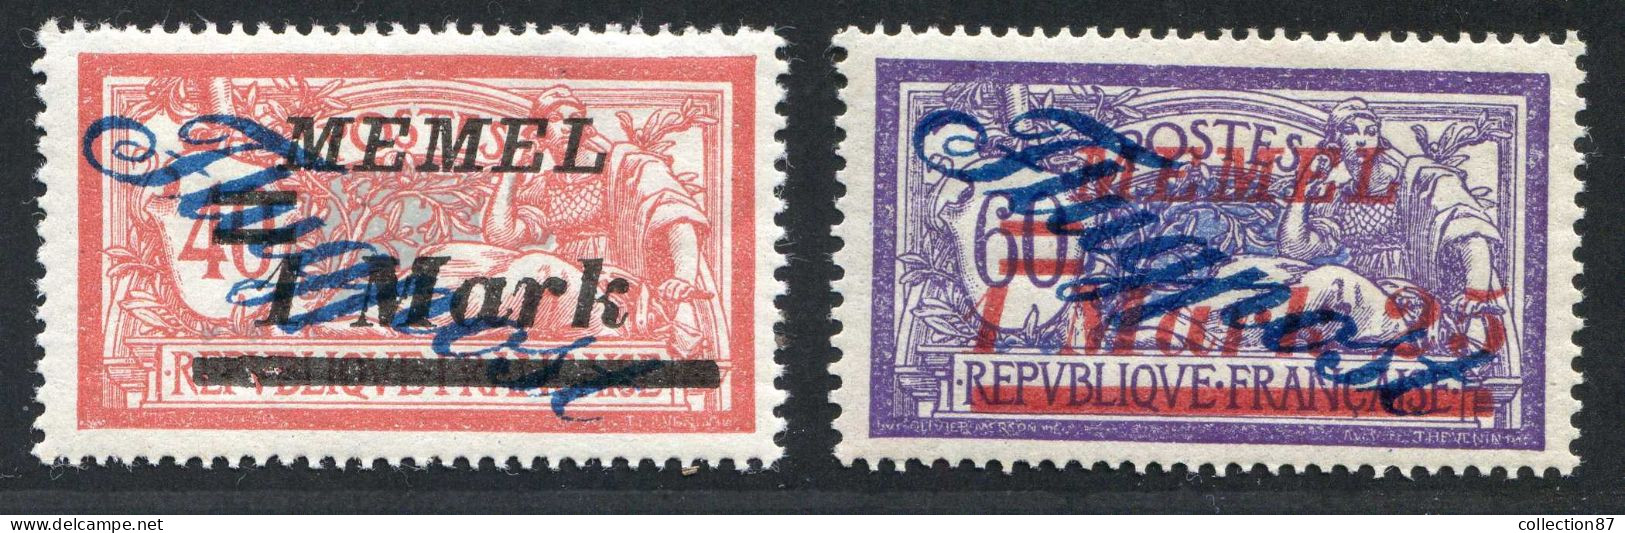 REF 088 > MEMEL FLUGPOST < PA N° 10 + 11 * Neuf Ch Dos Visible - MH * > Air Mail - Aéro - Unused Stamps